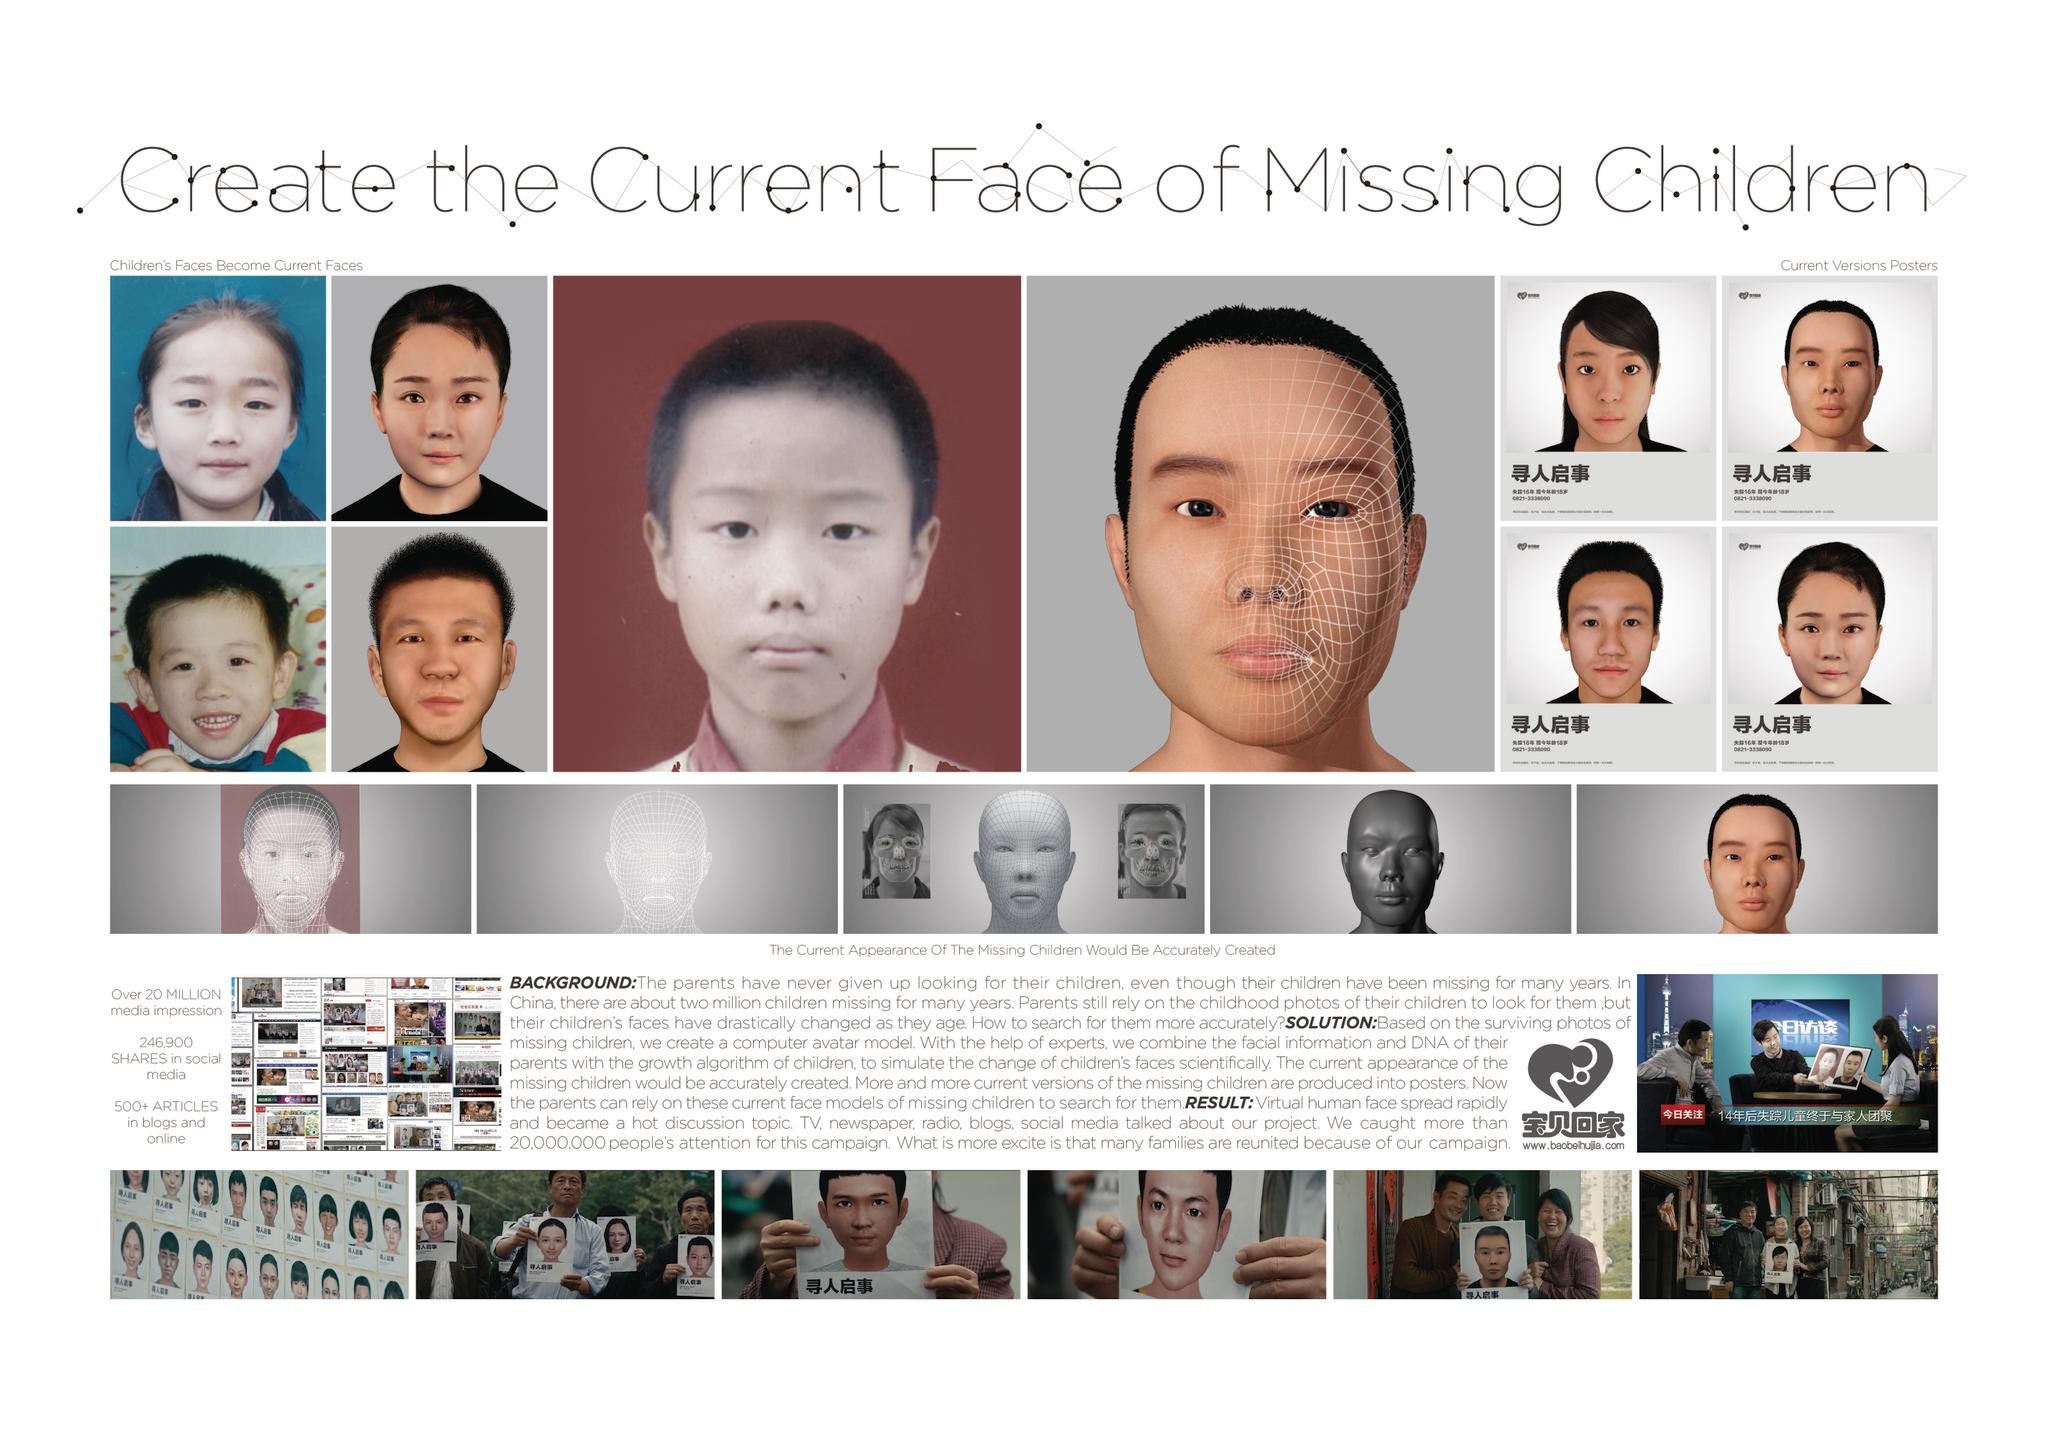 CREATE THE CURRENT FACE OF MISSING CHILDREN